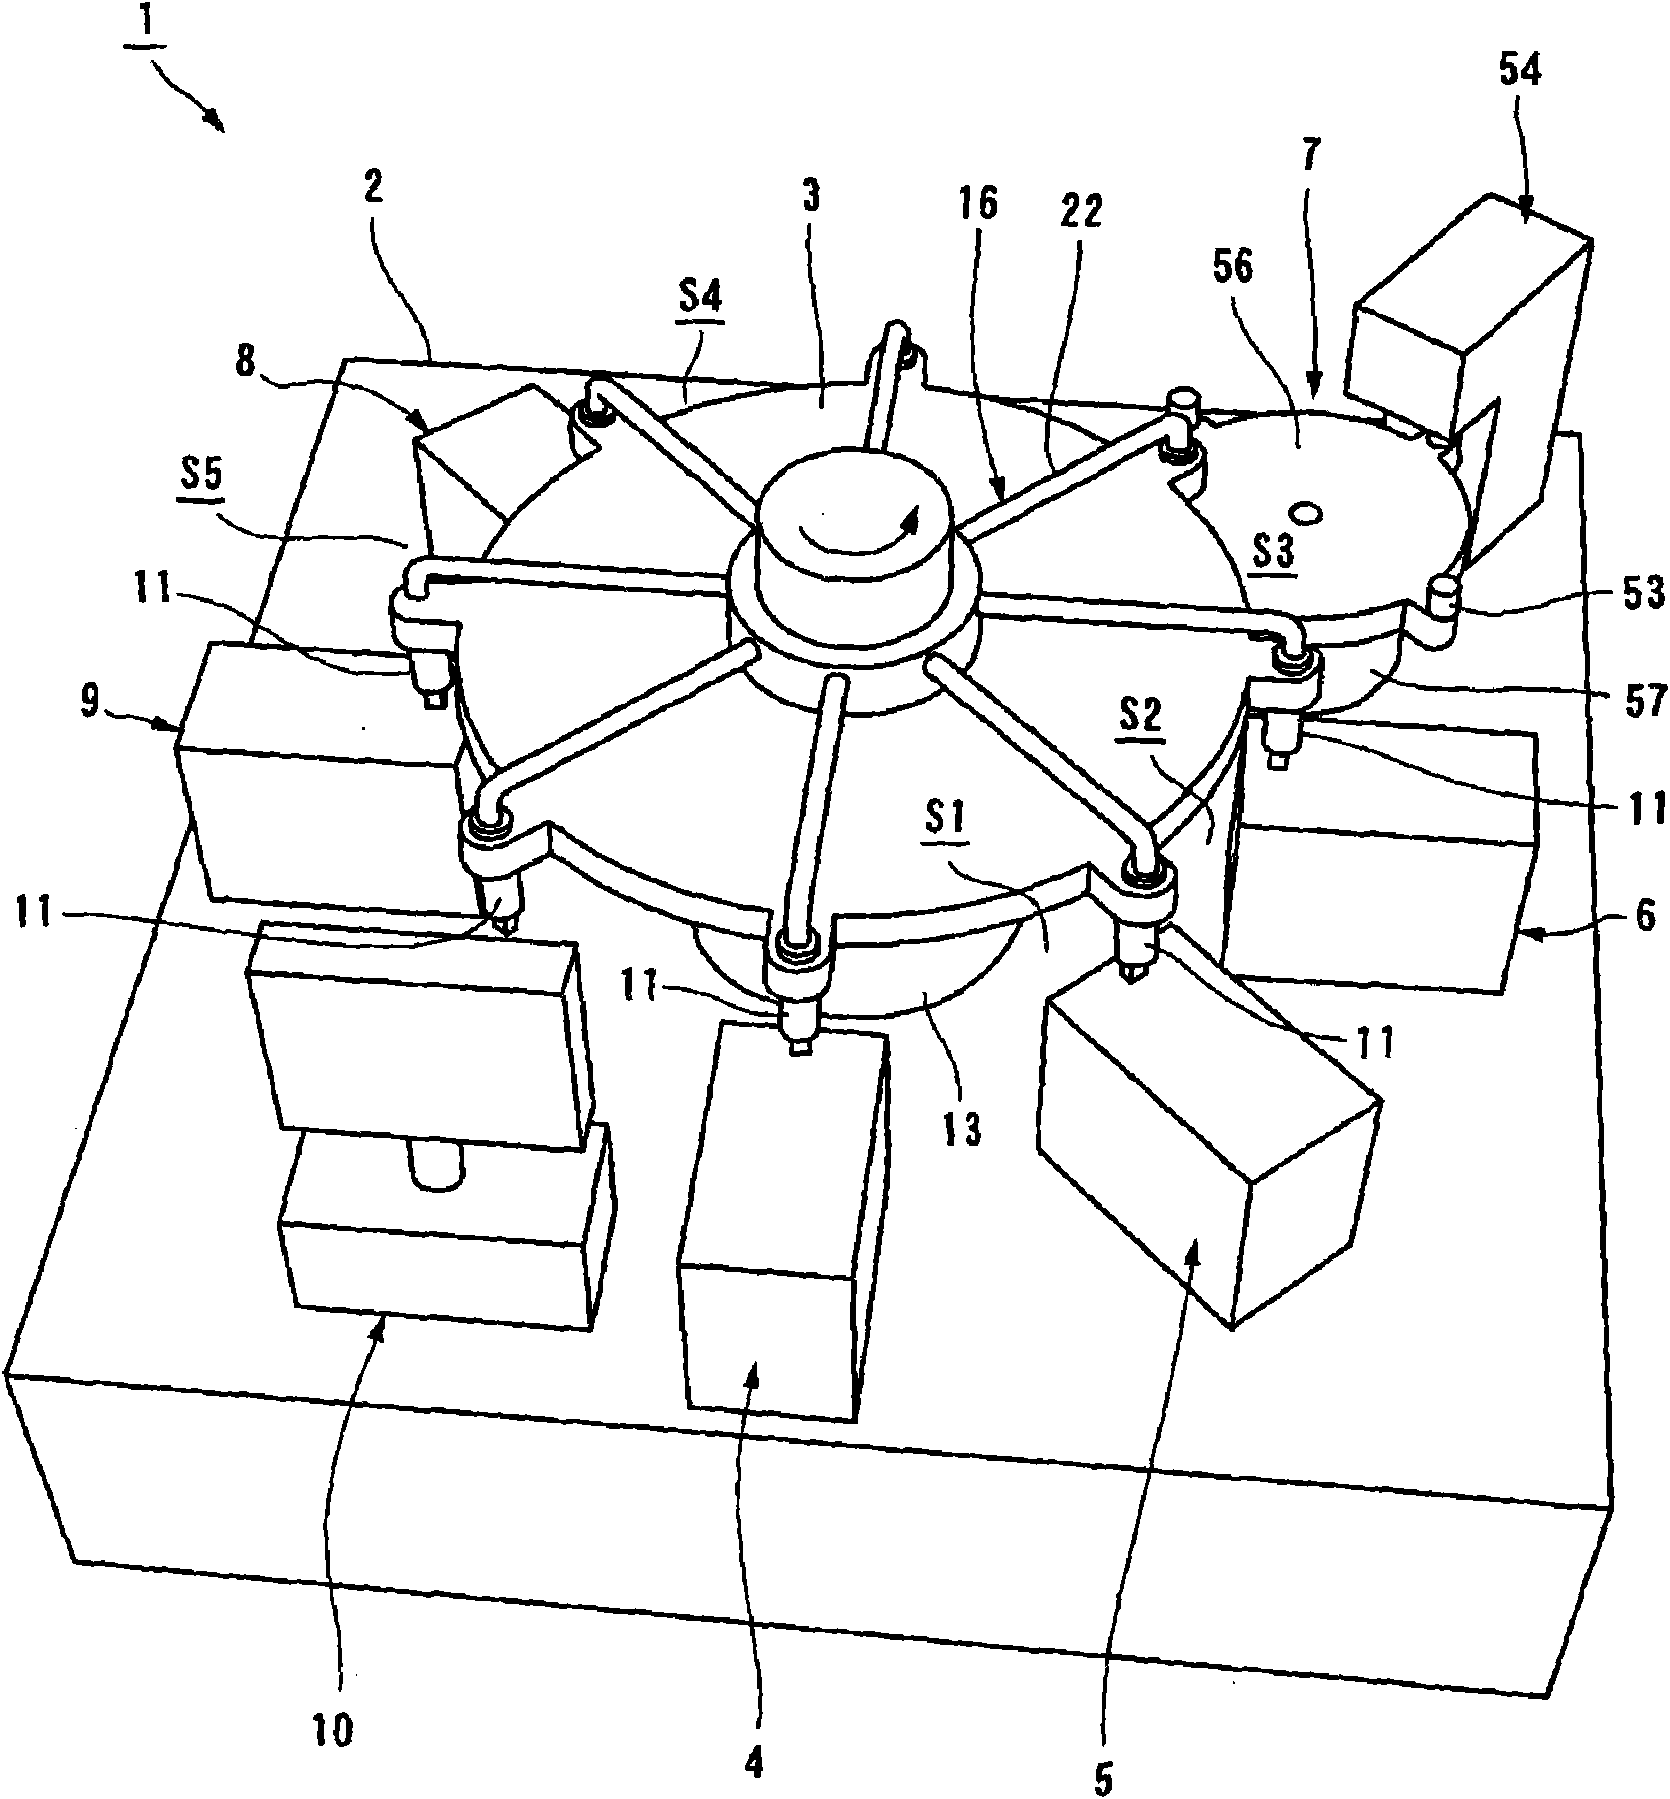 Apparatus for conveying electronic element